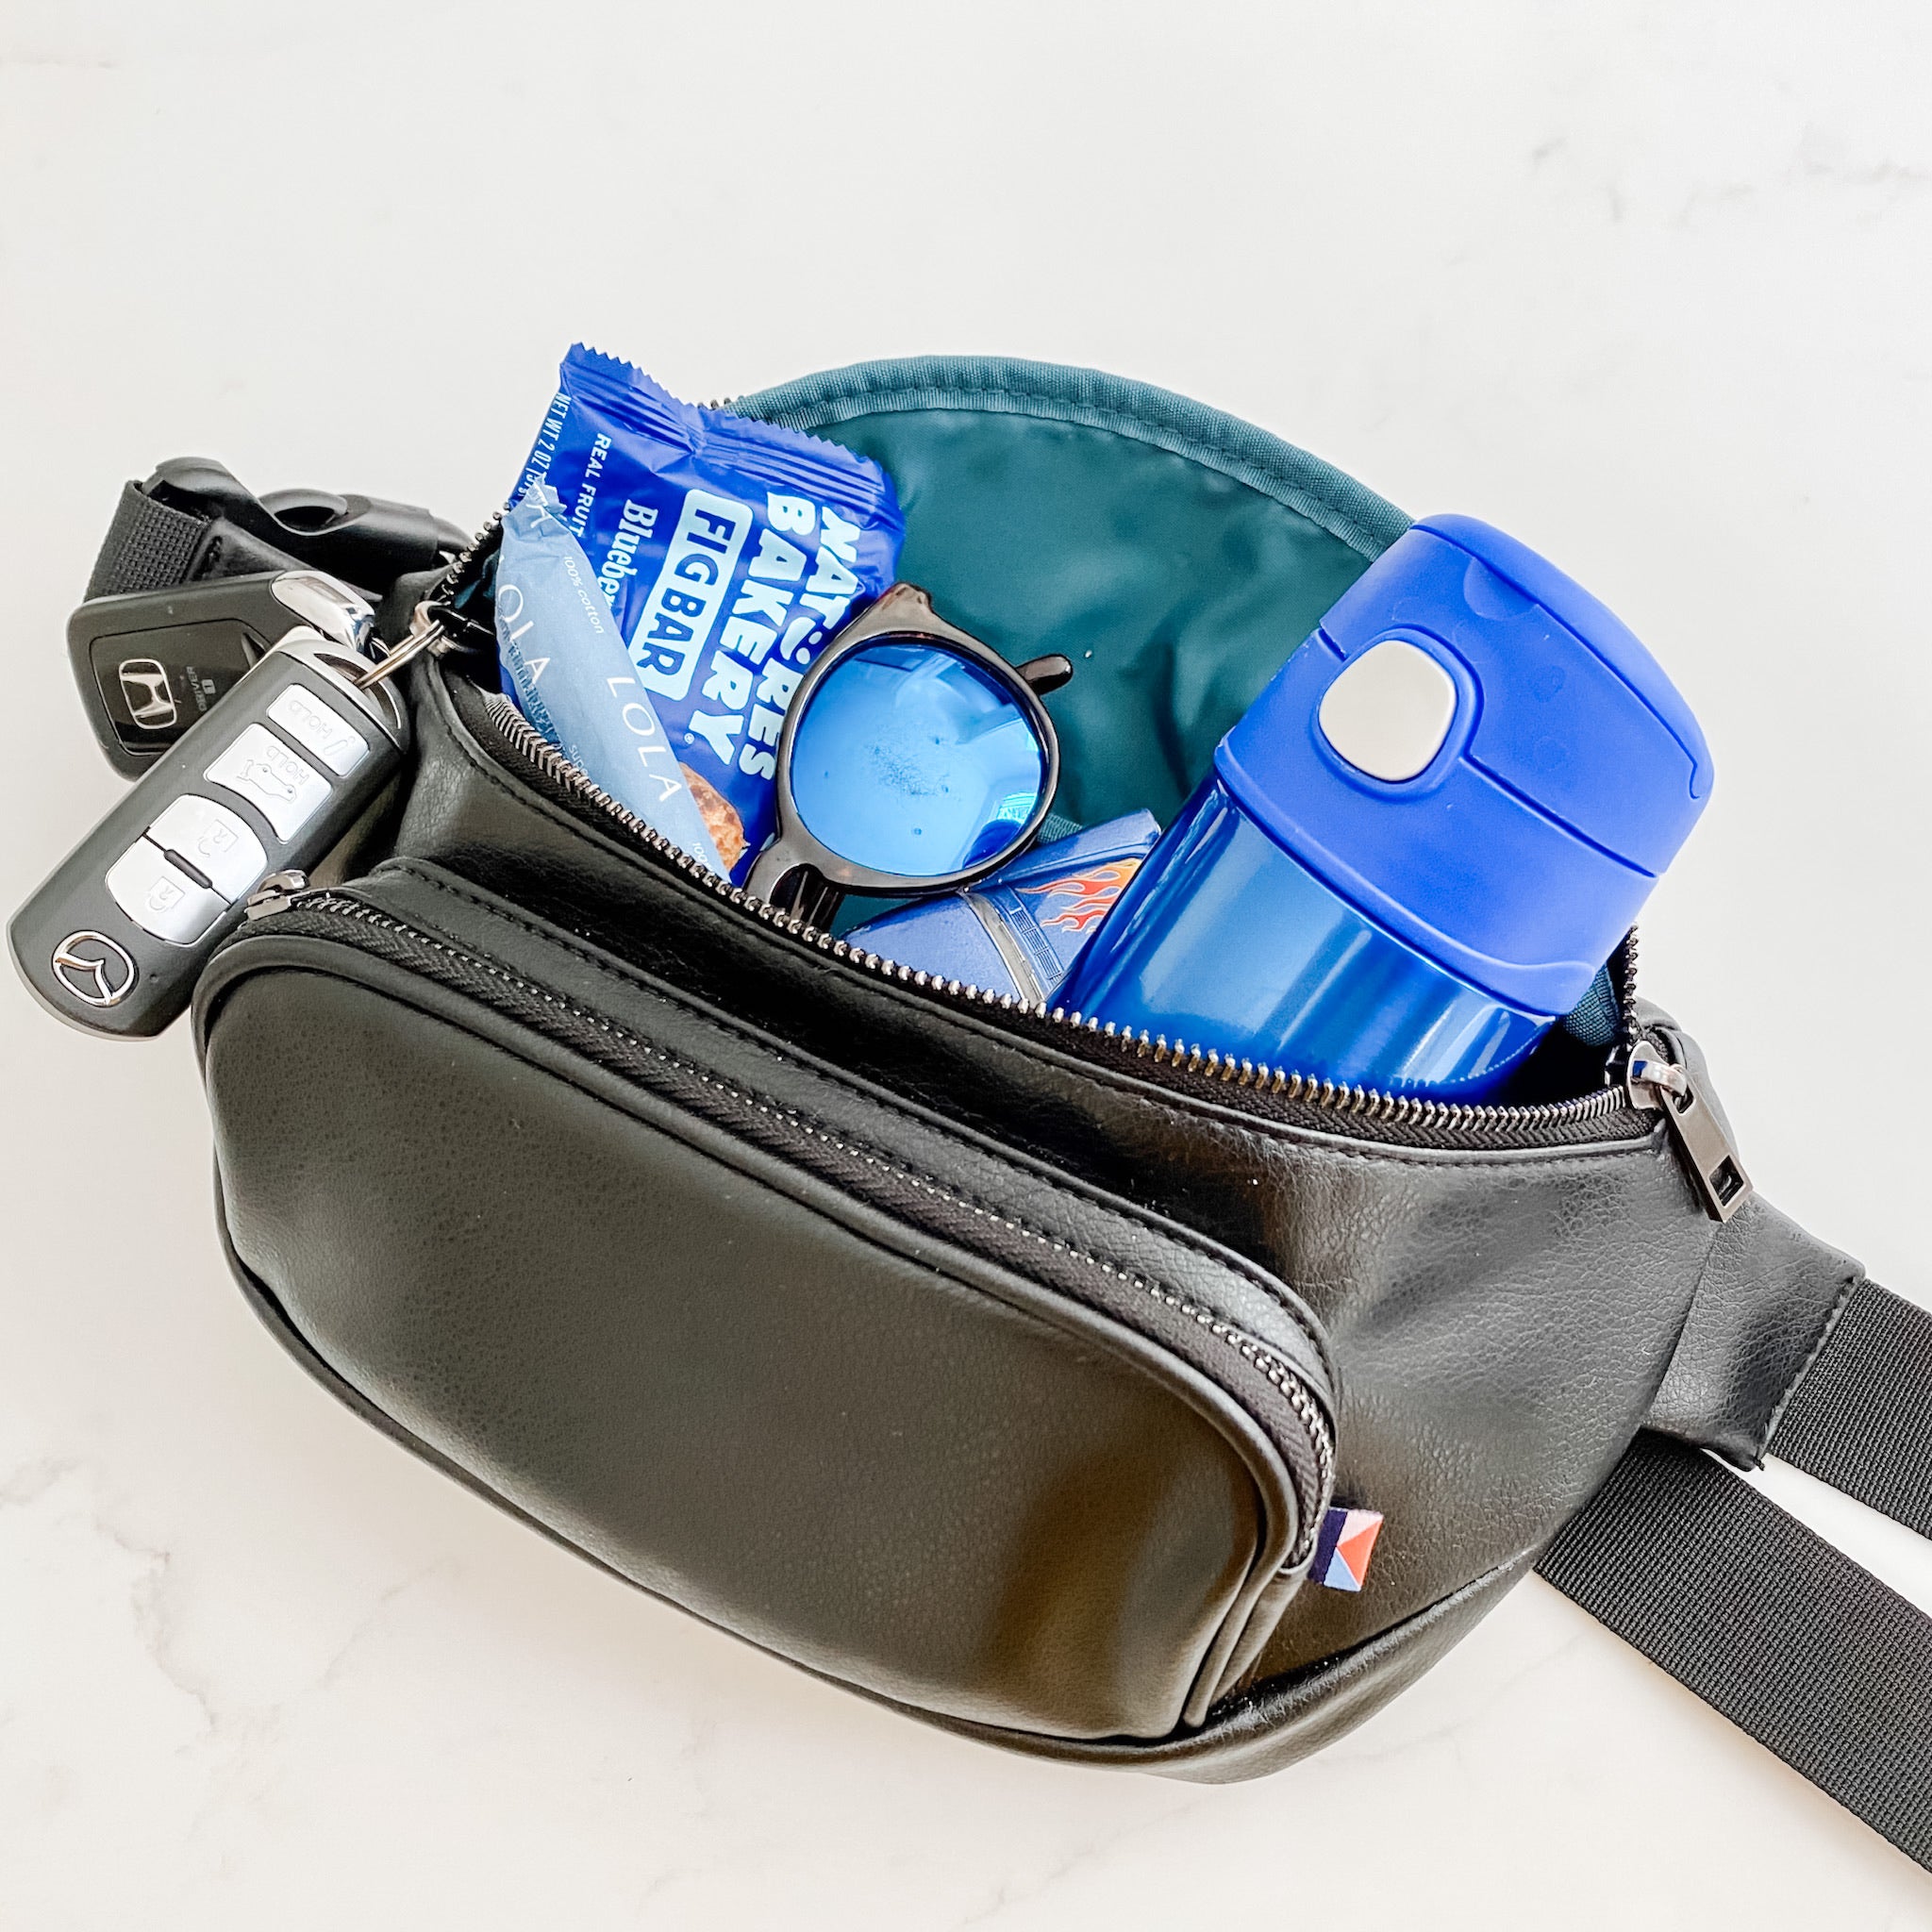 Travel fanny pack with all the travel essentials